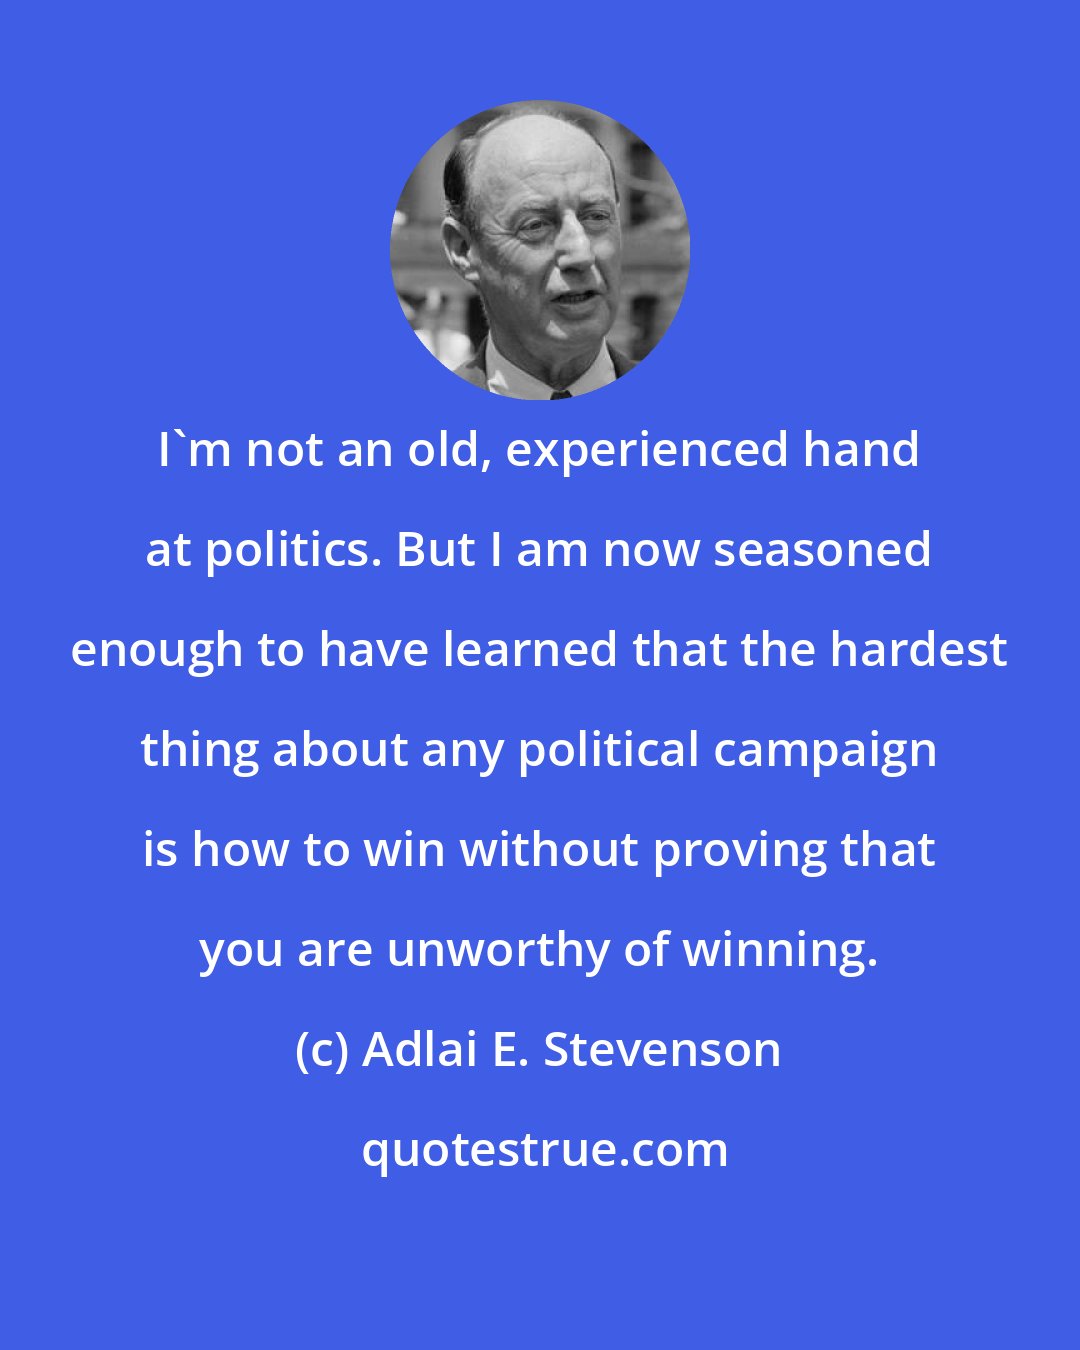 Adlai E. Stevenson: I'm not an old, experienced hand at politics. But I am now seasoned enough to have learned that the hardest thing about any political campaign is how to win without proving that you are unworthy of winning.